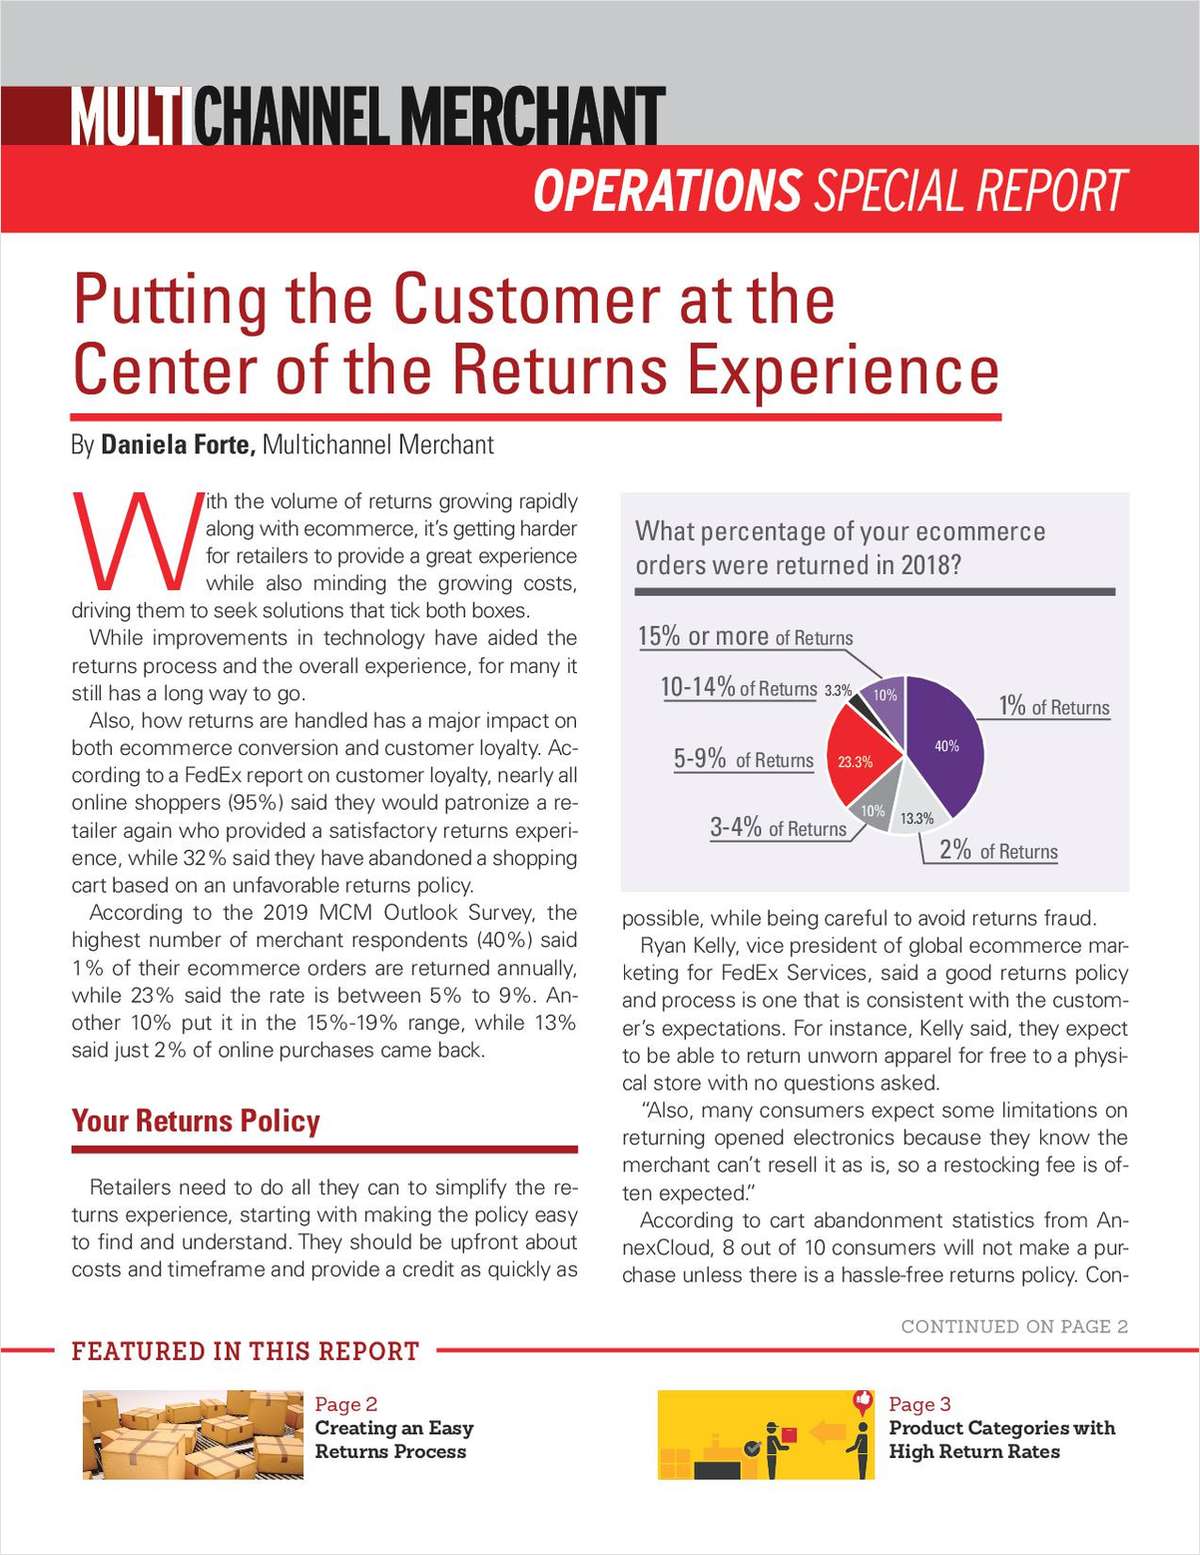 Creating a Customer-Centric Approach to the Returns Experience